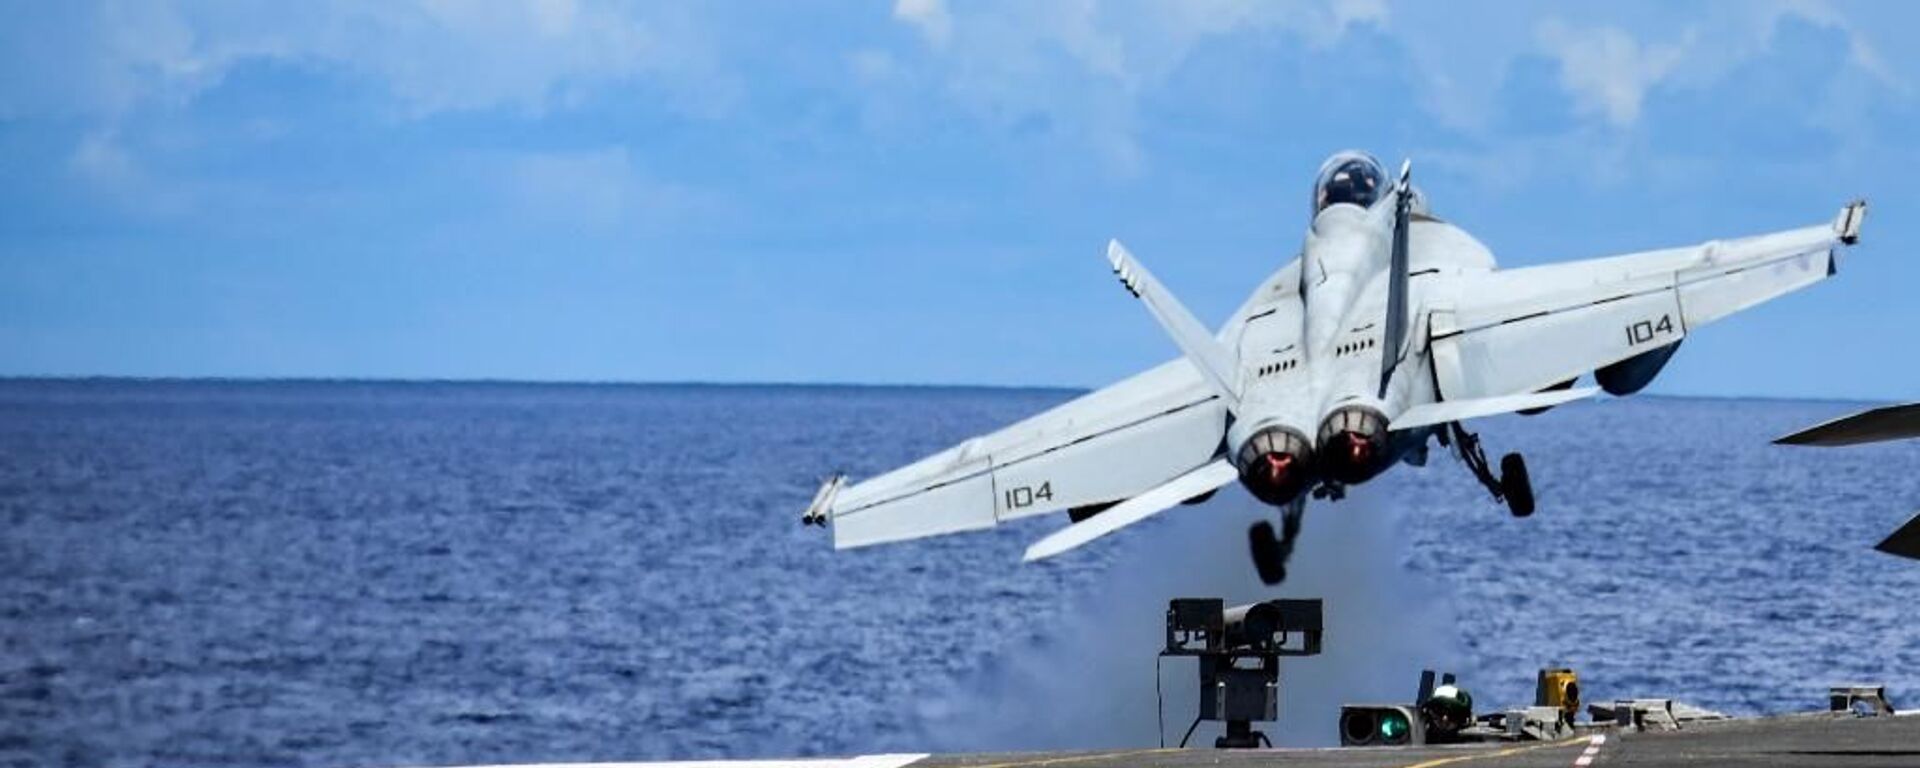 Fighter jet takes off from the USS Ronald Reagan aircraft carrier amid drills in the South China Sea. - Sputnik International, 1920, 29.08.2022